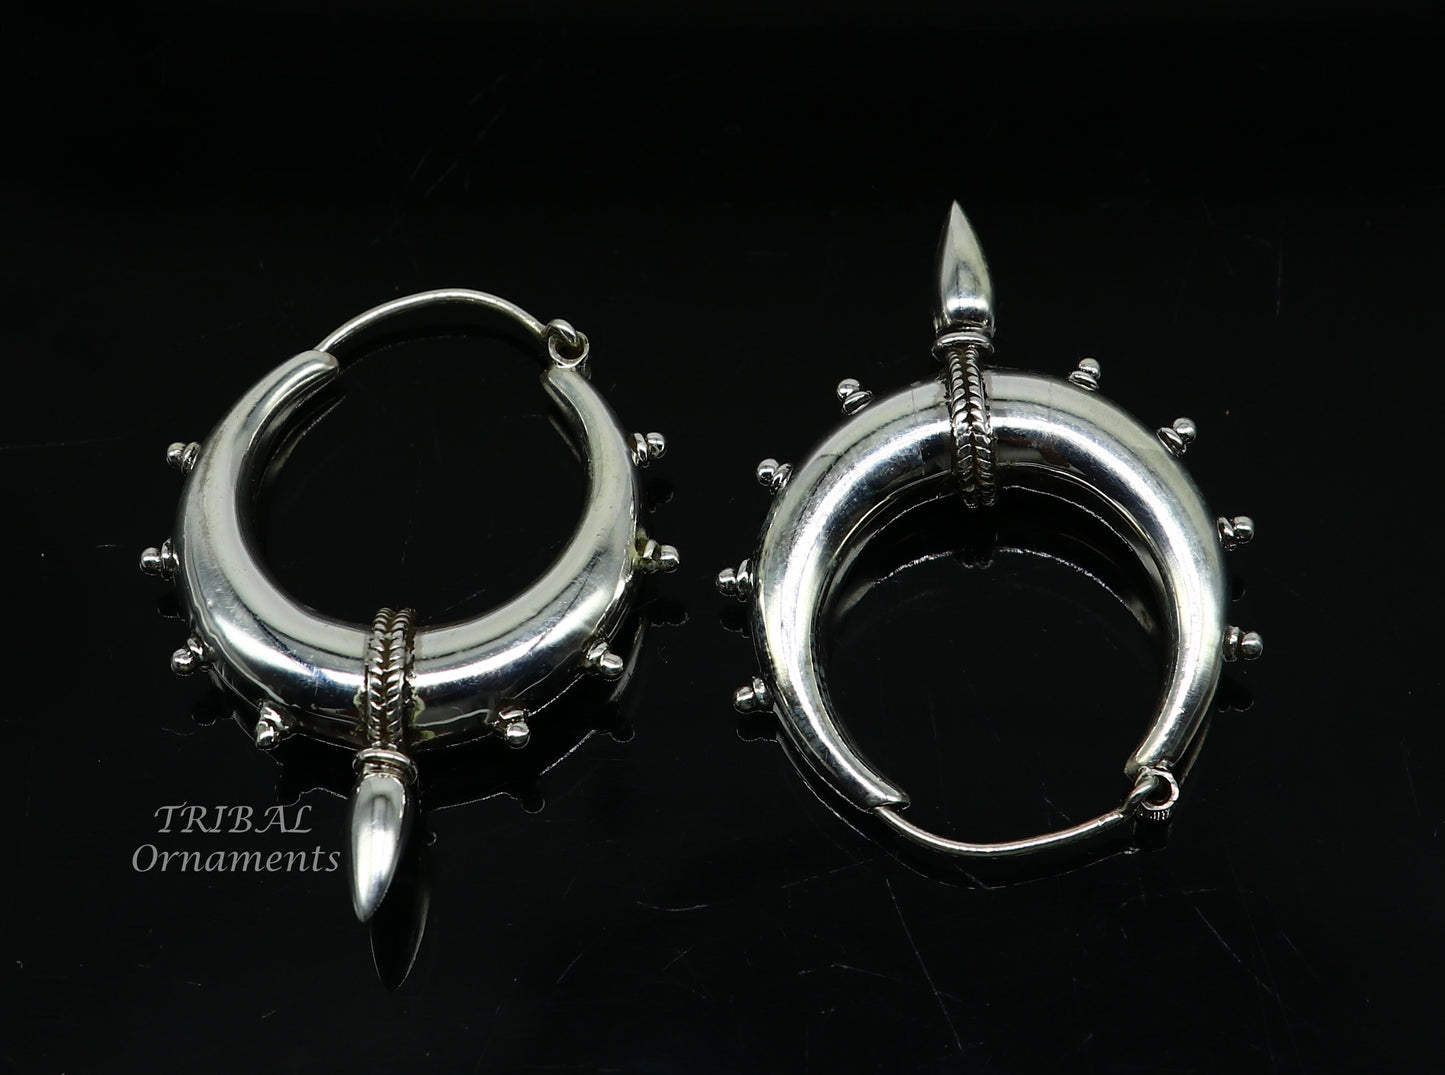 925 sterling silver handmade vintage ethnic style hoops earrings kundal,ethnic pretty bali tribal belly dance jewelry from india s1067 - TRIBAL ORNAMENTS